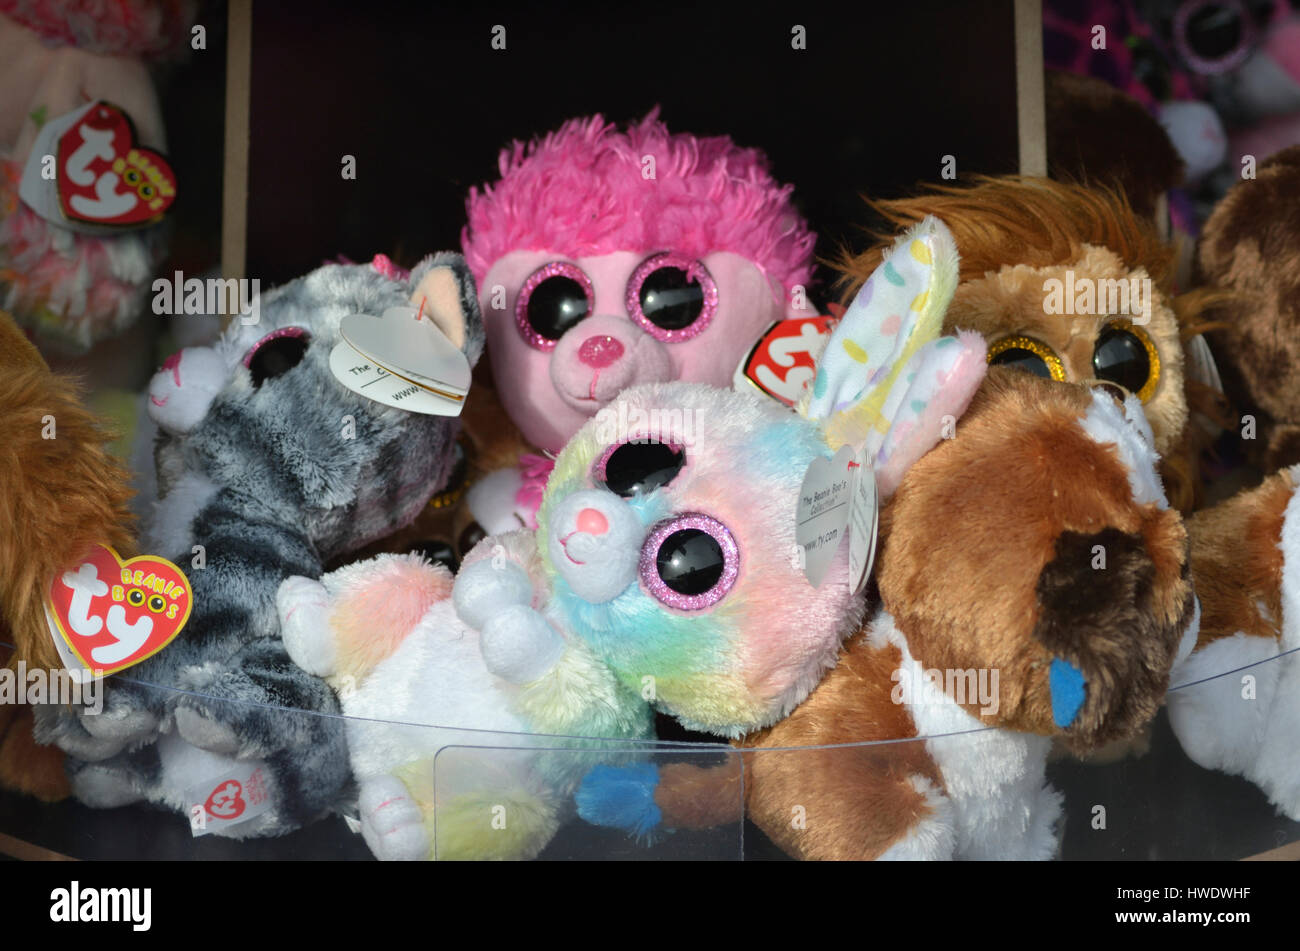 Cuddly toys in a shop window display. Stock Photo